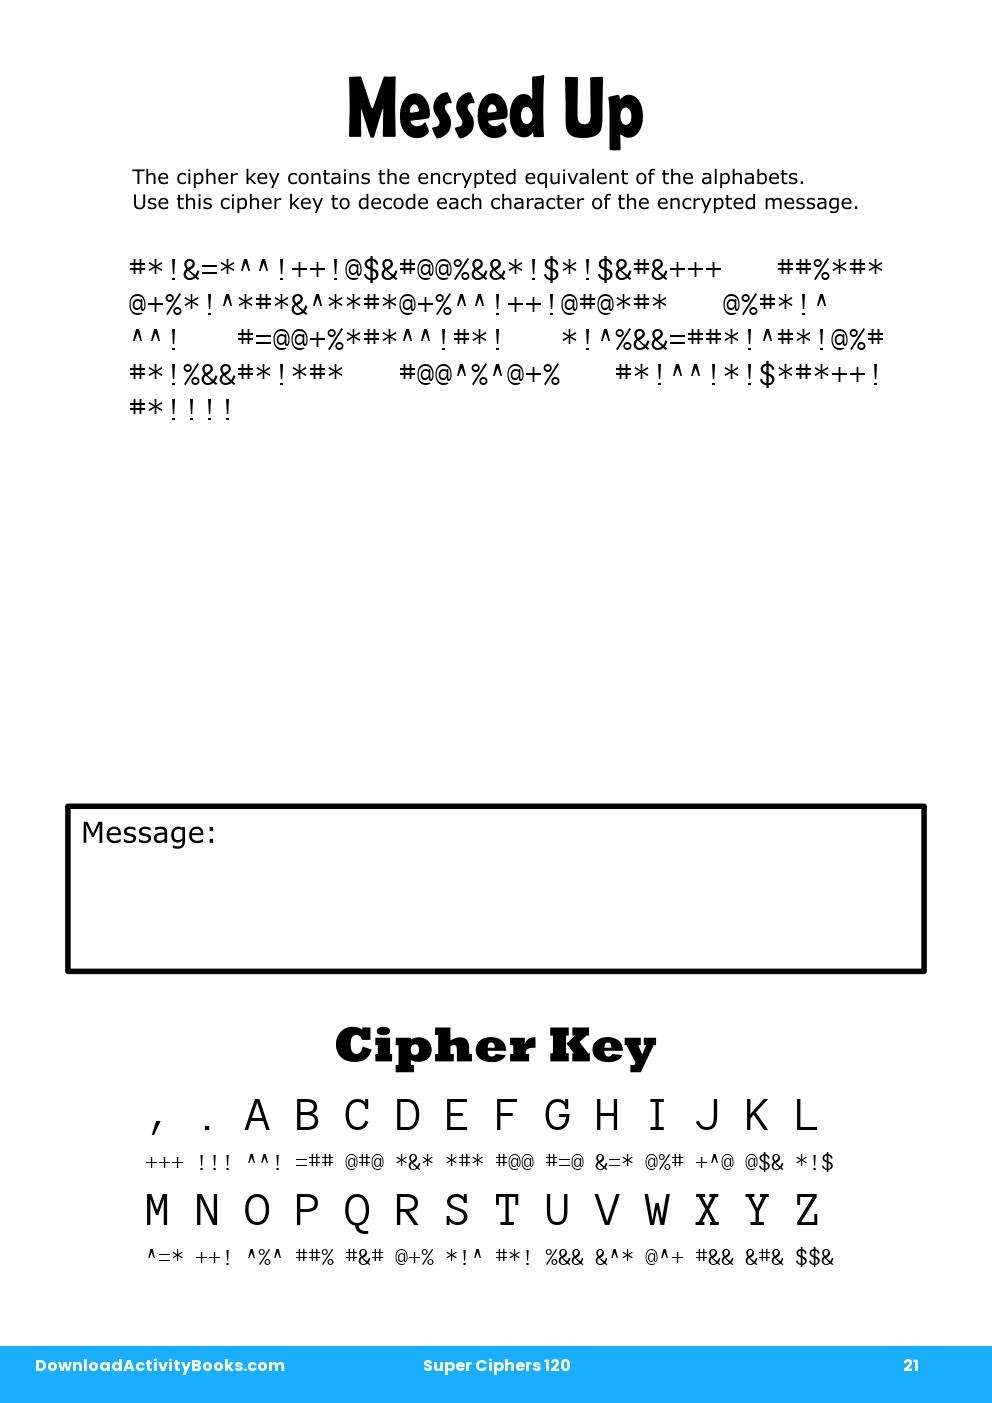 Messed Up in Super Ciphers 120